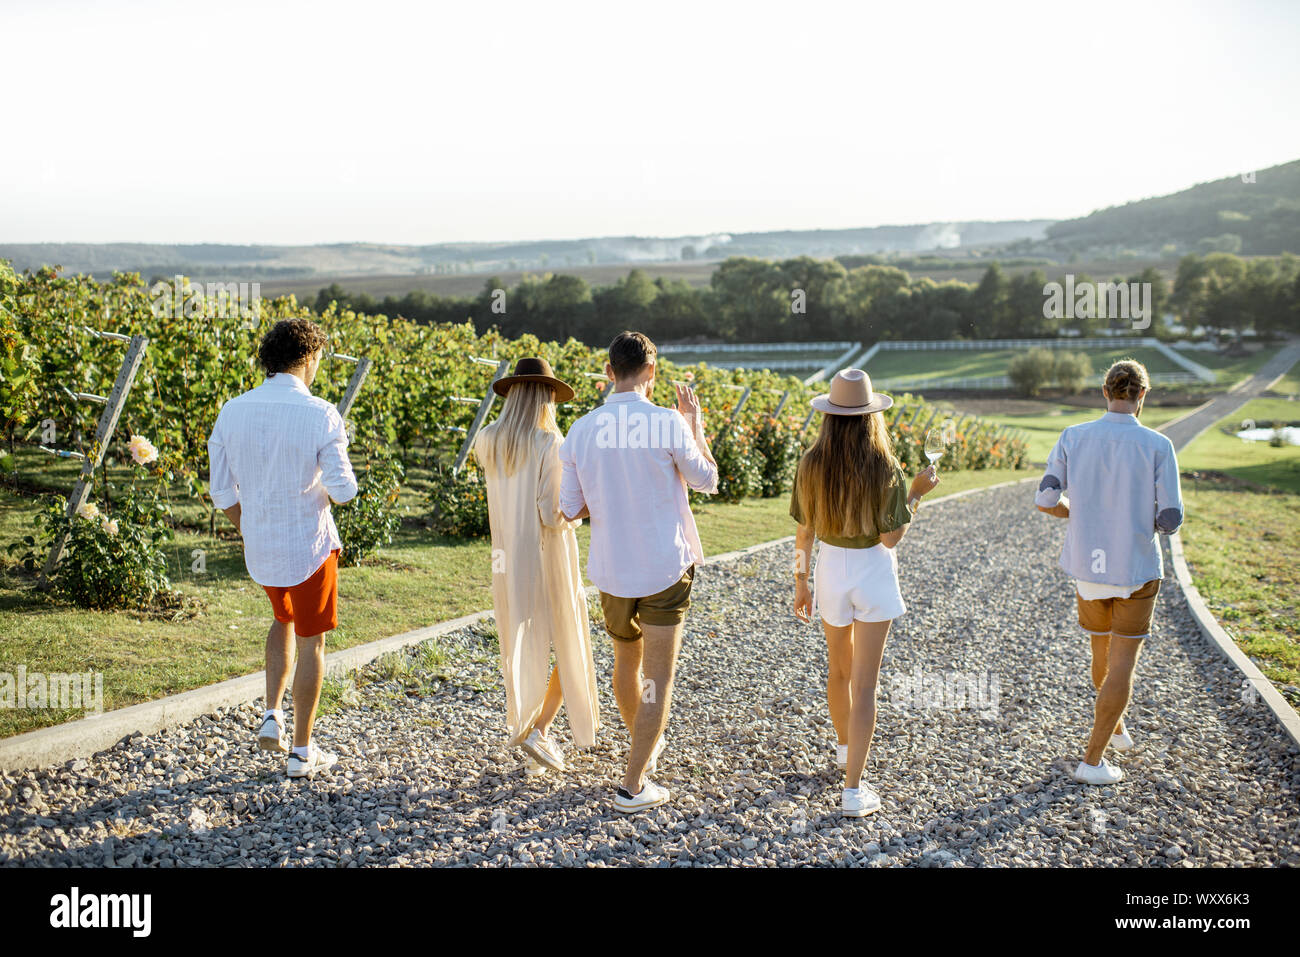 Group of young friends dressed casually hanging out together, walking with wine glasses on the vineyard on a sunny day, view from above Stock Photo